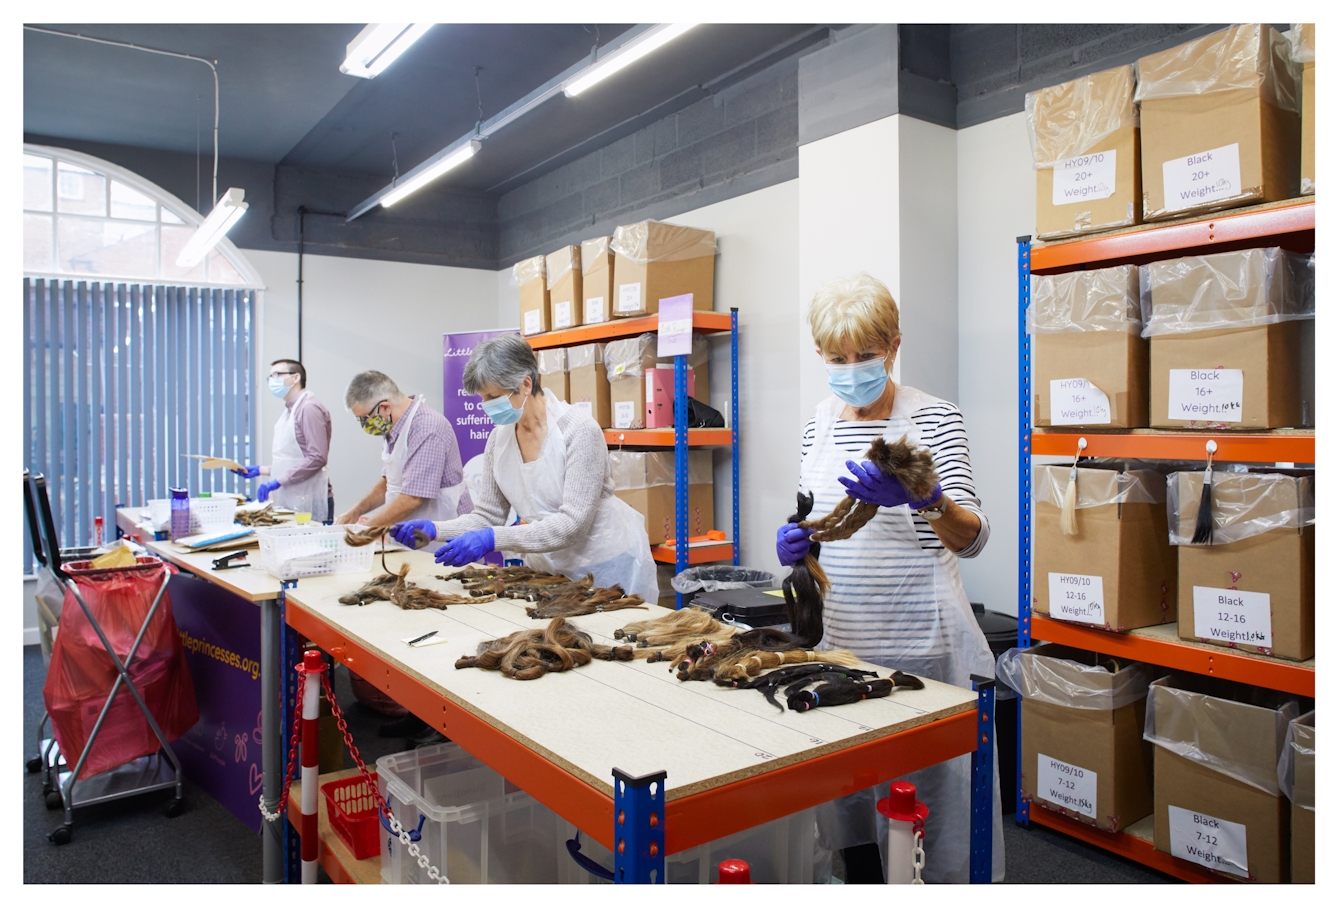 Photograph showing an indoor setting with a large industrial table and shelving coloured blue and orange. Behind the table are 4 individuals wearing white plastic aprons, face coverings and purple latex groves. They are each opening and sorting packages containing cut hair donations. On the tabletop are many groups of cut hair, ties or plaited together. There is a variety of hair coloured and types. On the shelves behind the people are large labelled cardboard boxes.